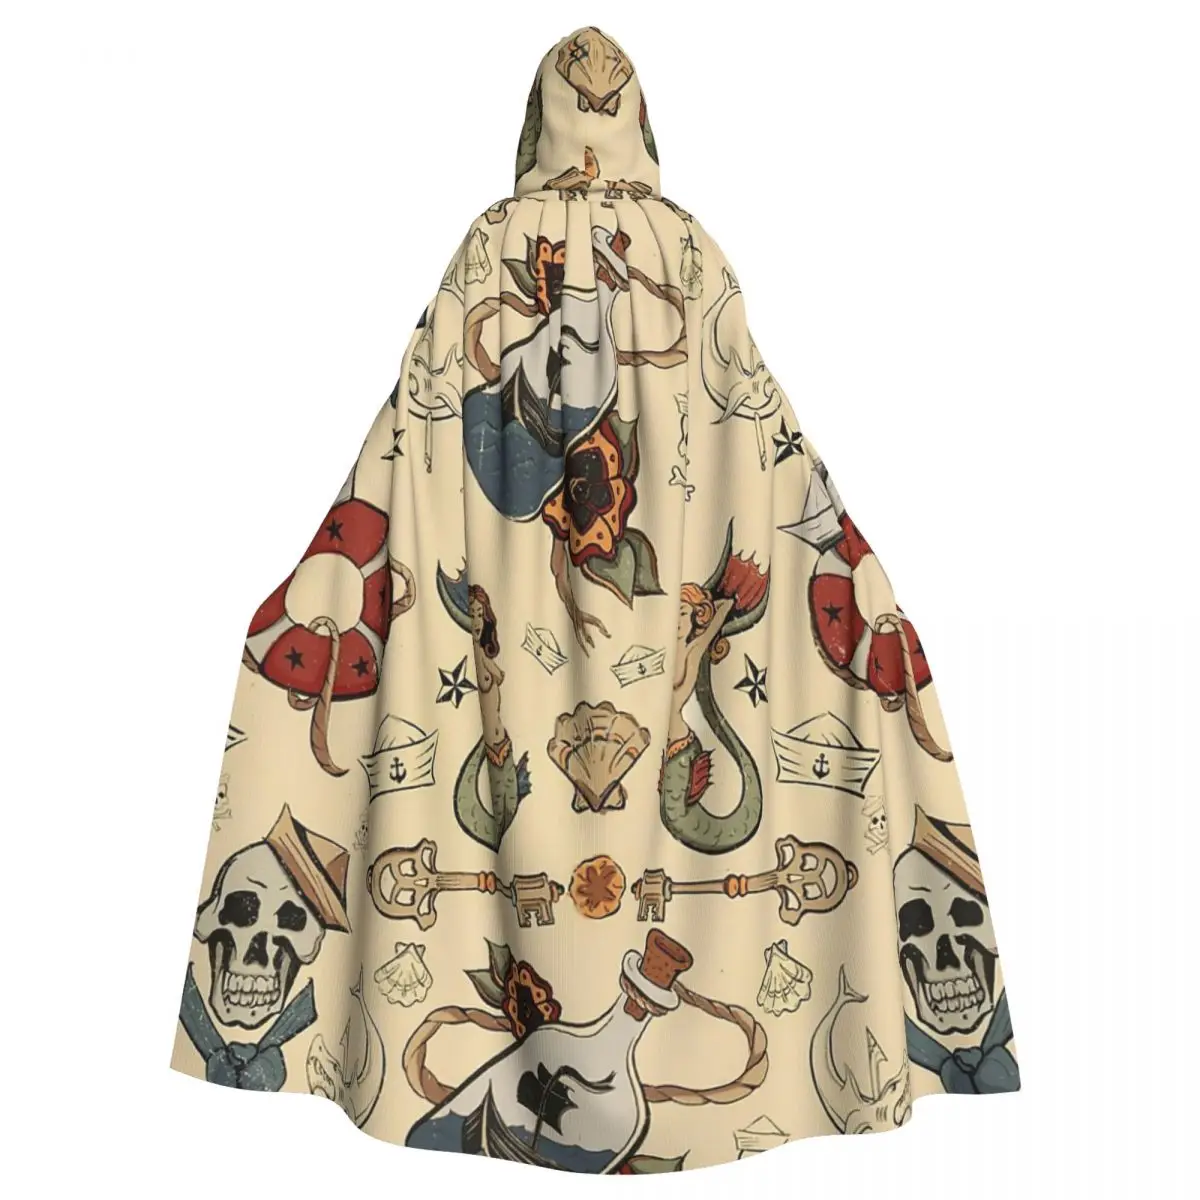 

Sea Tattoo Repeating Pattern Hooded Cloak Halloween Party Cosplay Woman Men Adult Long Witchcraft Robe Hood